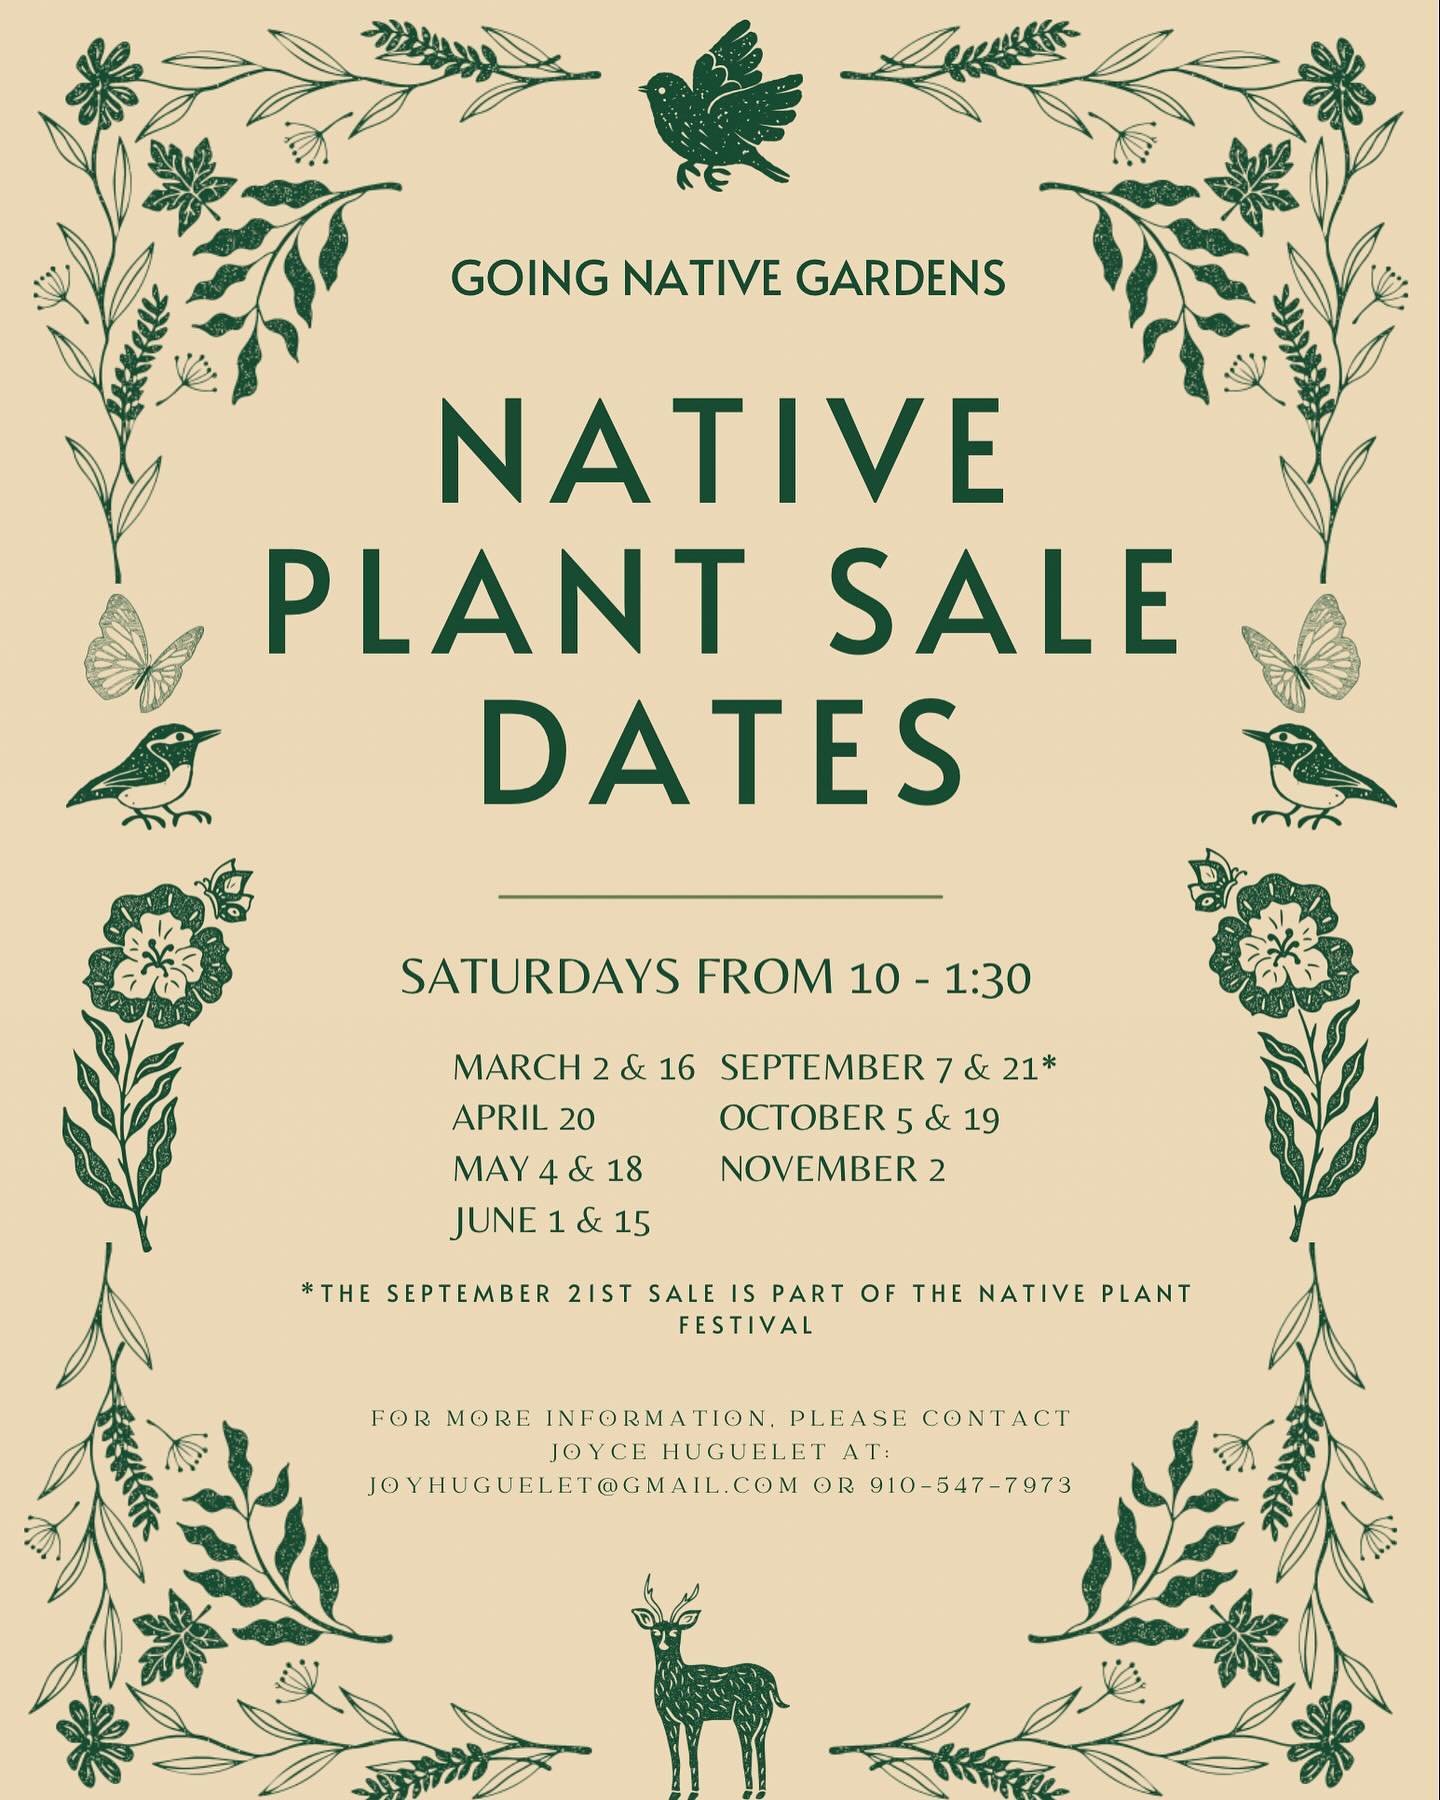 A reminder of native plant sale dates with our friends at Going Native Gardens! 

#nativeplantsales #buynativeplants #wildbirdandgarden #shopsmall #localbusiness #familyownedbusiness #wilmingtonnc #supportsmallbusiness #shoplocalilm #smallbusiness